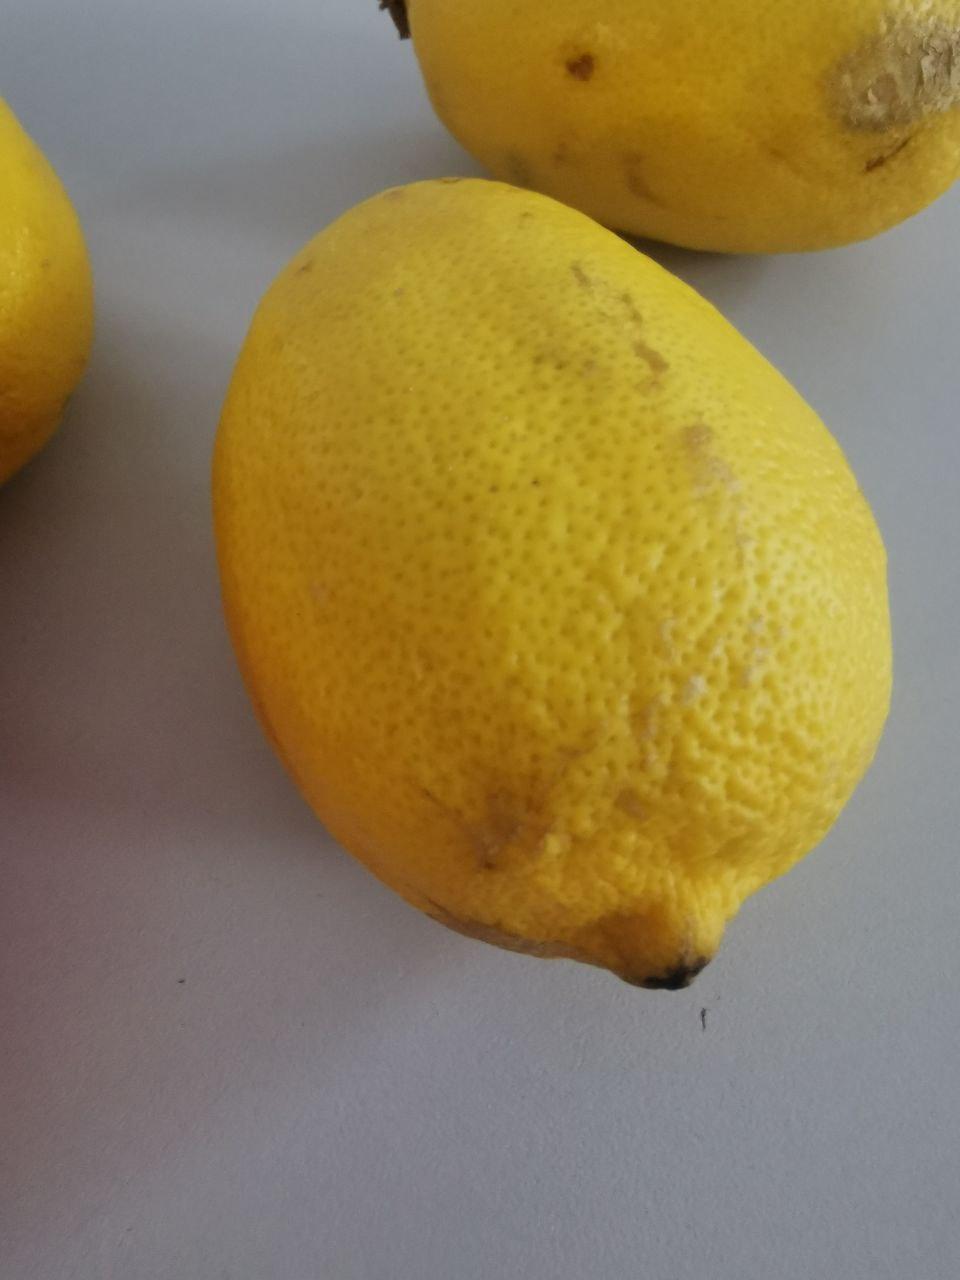 A group of lemons on a white surface

Description automatically generated